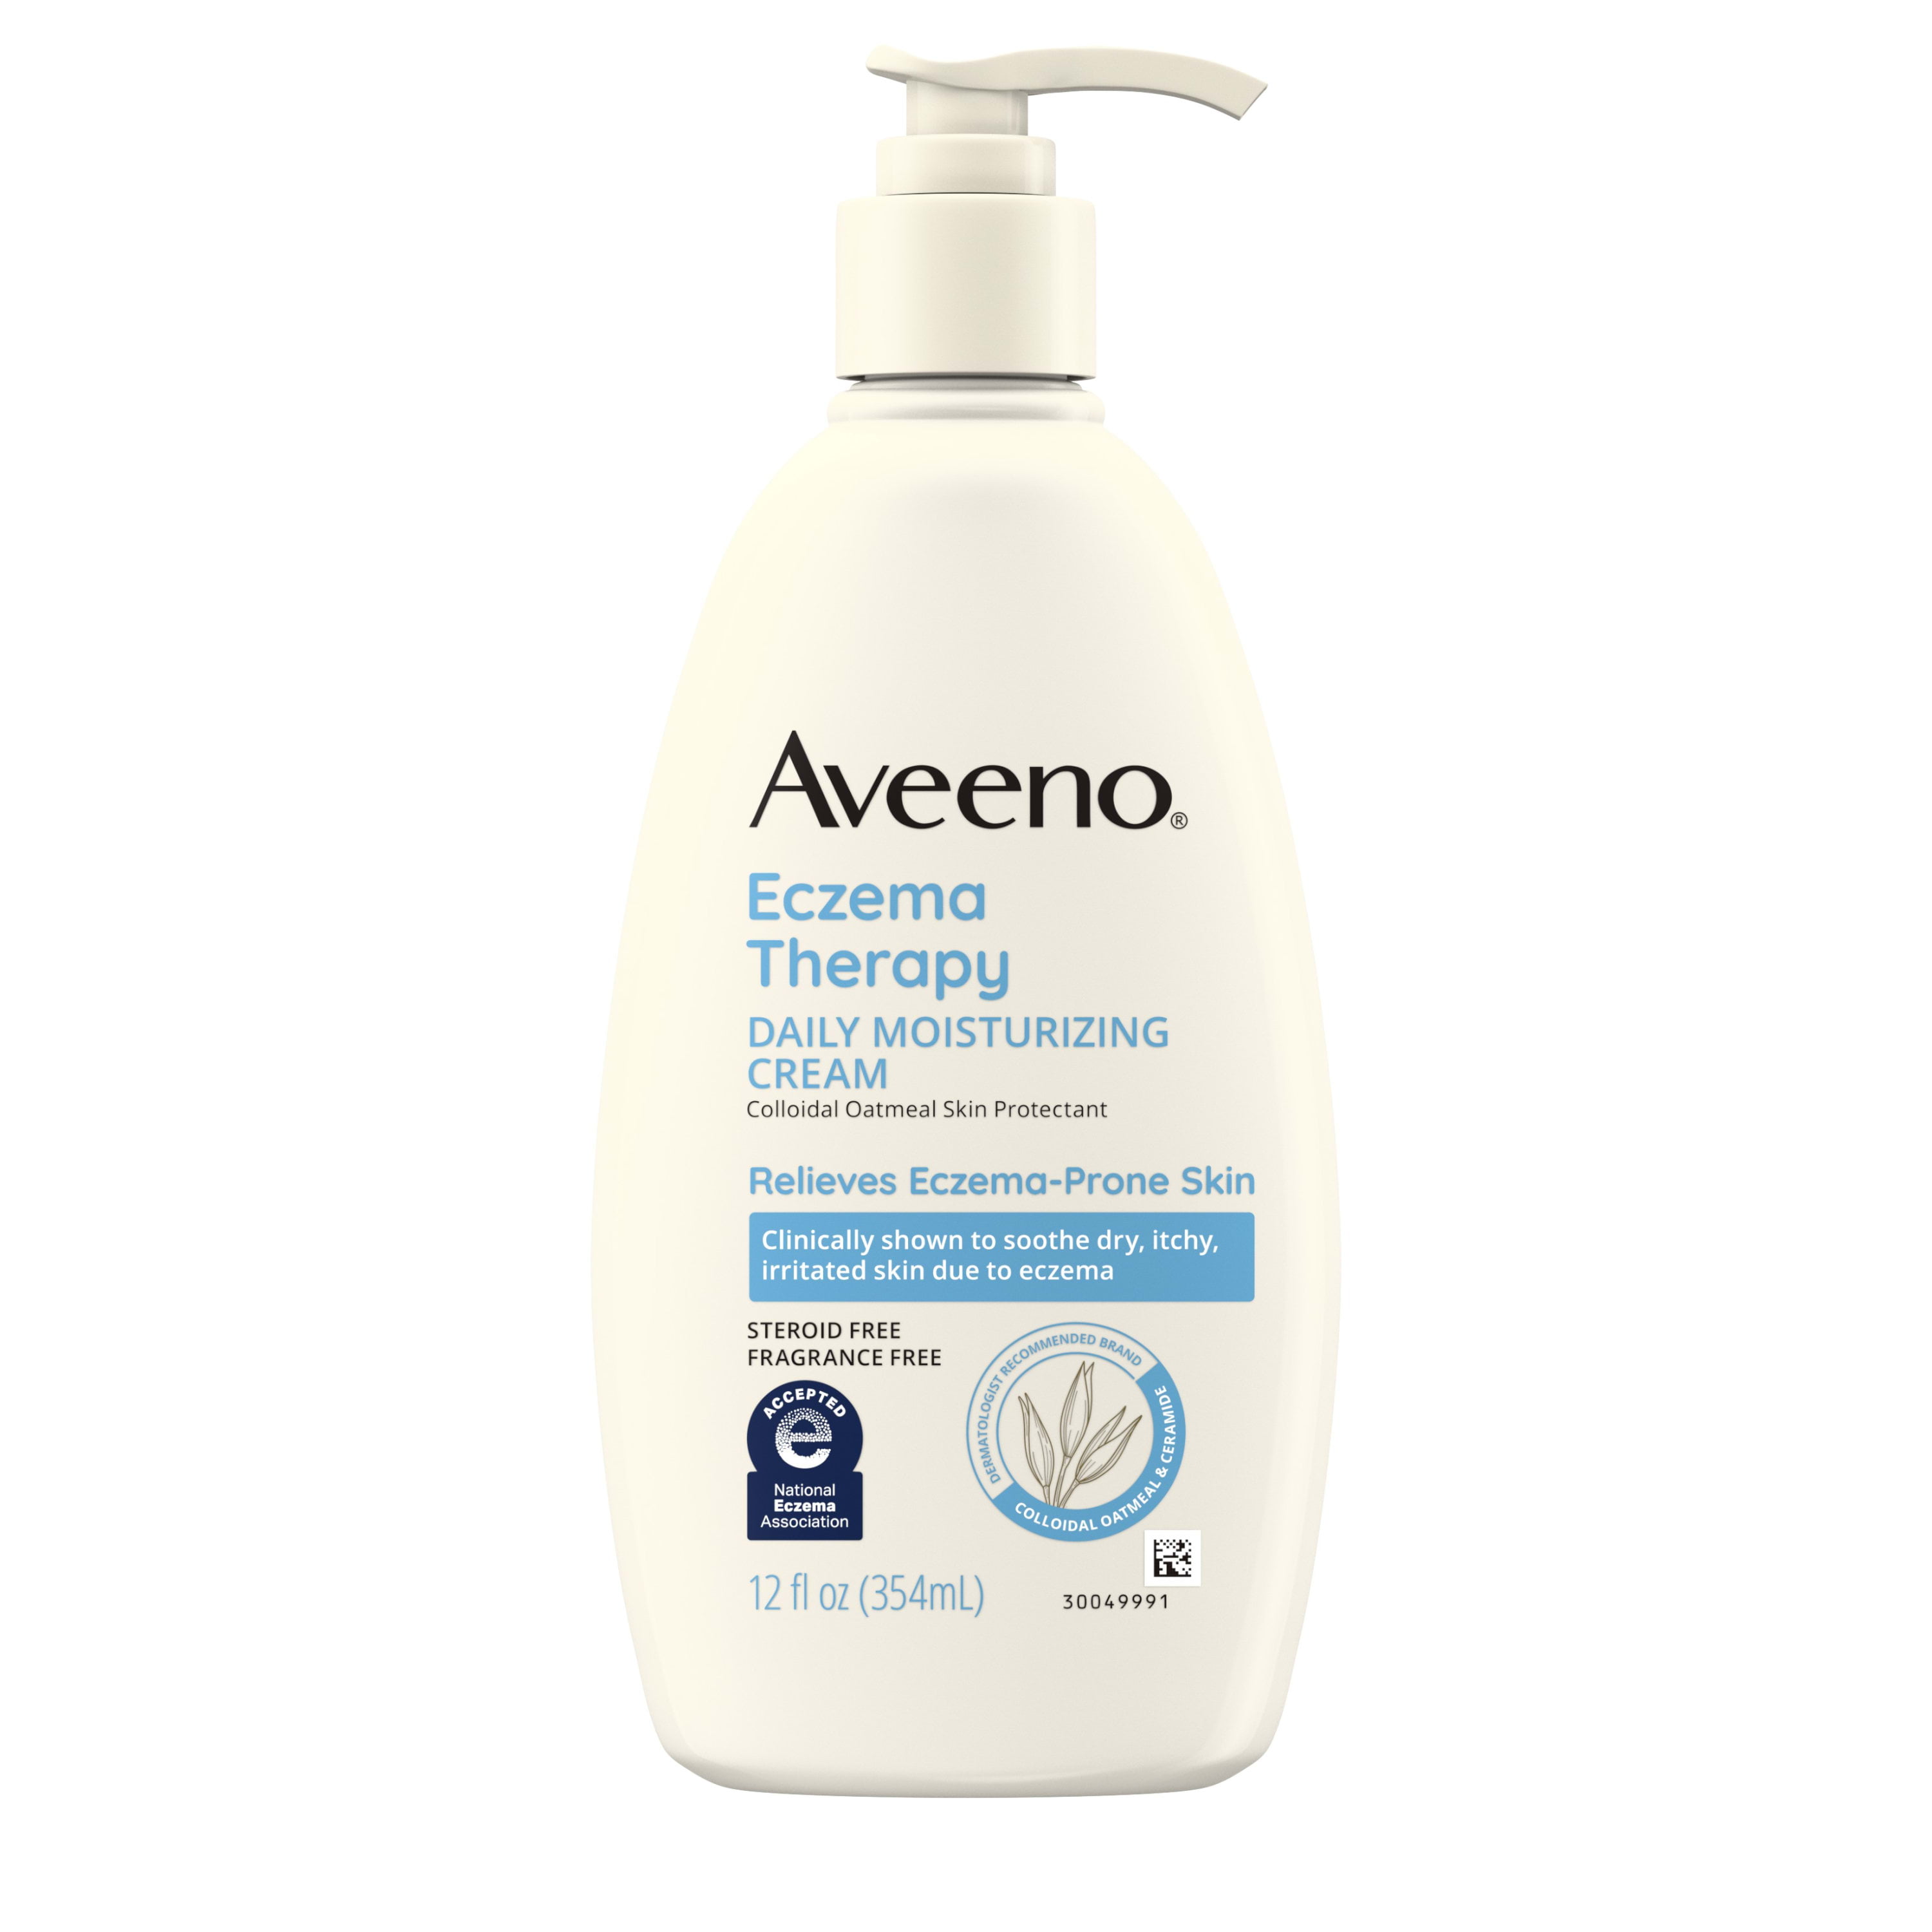 Aveeno Eczema Therapy Daily Soothing Body Cream, Steroid-Free, 12 oz